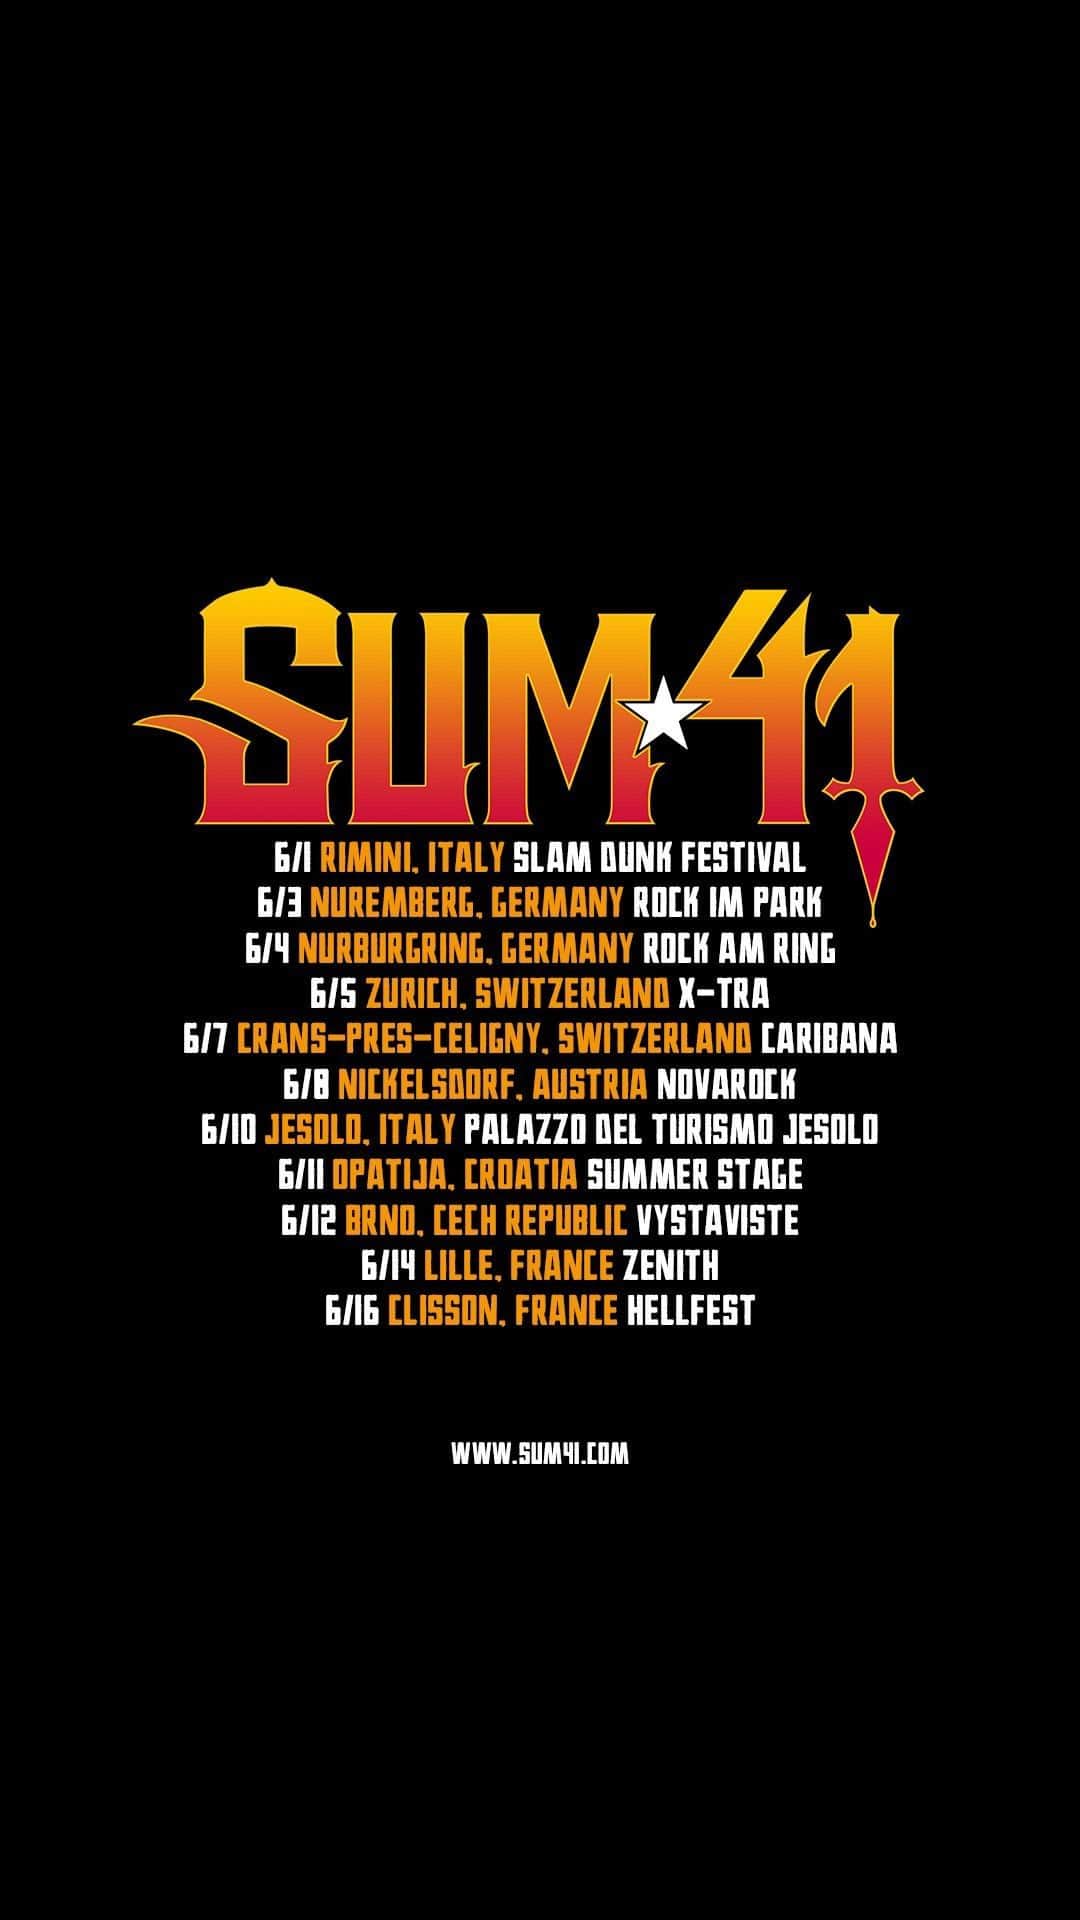 Sum 41のインスタグラム：「We’re headed to Europe in June for some of our favorite festivals and a couple of headline shows! It’s gonna be a blast!  6/1 | Rimini, Italy | @slamdunkitaly 6/3 | Nuremberg, Germany | @rockimparkofficial 6/4 | Nurburgring, Germany | @rockamringofficial 6/5 | Zurich, Switzerland | @xtrazuerich 6/7 | Crans-Pres-Celigny, Switzerland | @caribanafestival 6/8 | Nickelsdorf, Austria | @novarockfestival 6/10 | Jesolo, italy | Palazzo del Turismo Jesolo 6/11 | Opatija, Croatia | Summer Stage 6/12 | Brno, Cech Republic | Vystaviste 6/14 | Lille, France | @zenithdelille 6/16 | Clisson, France | @hellfestopenair」